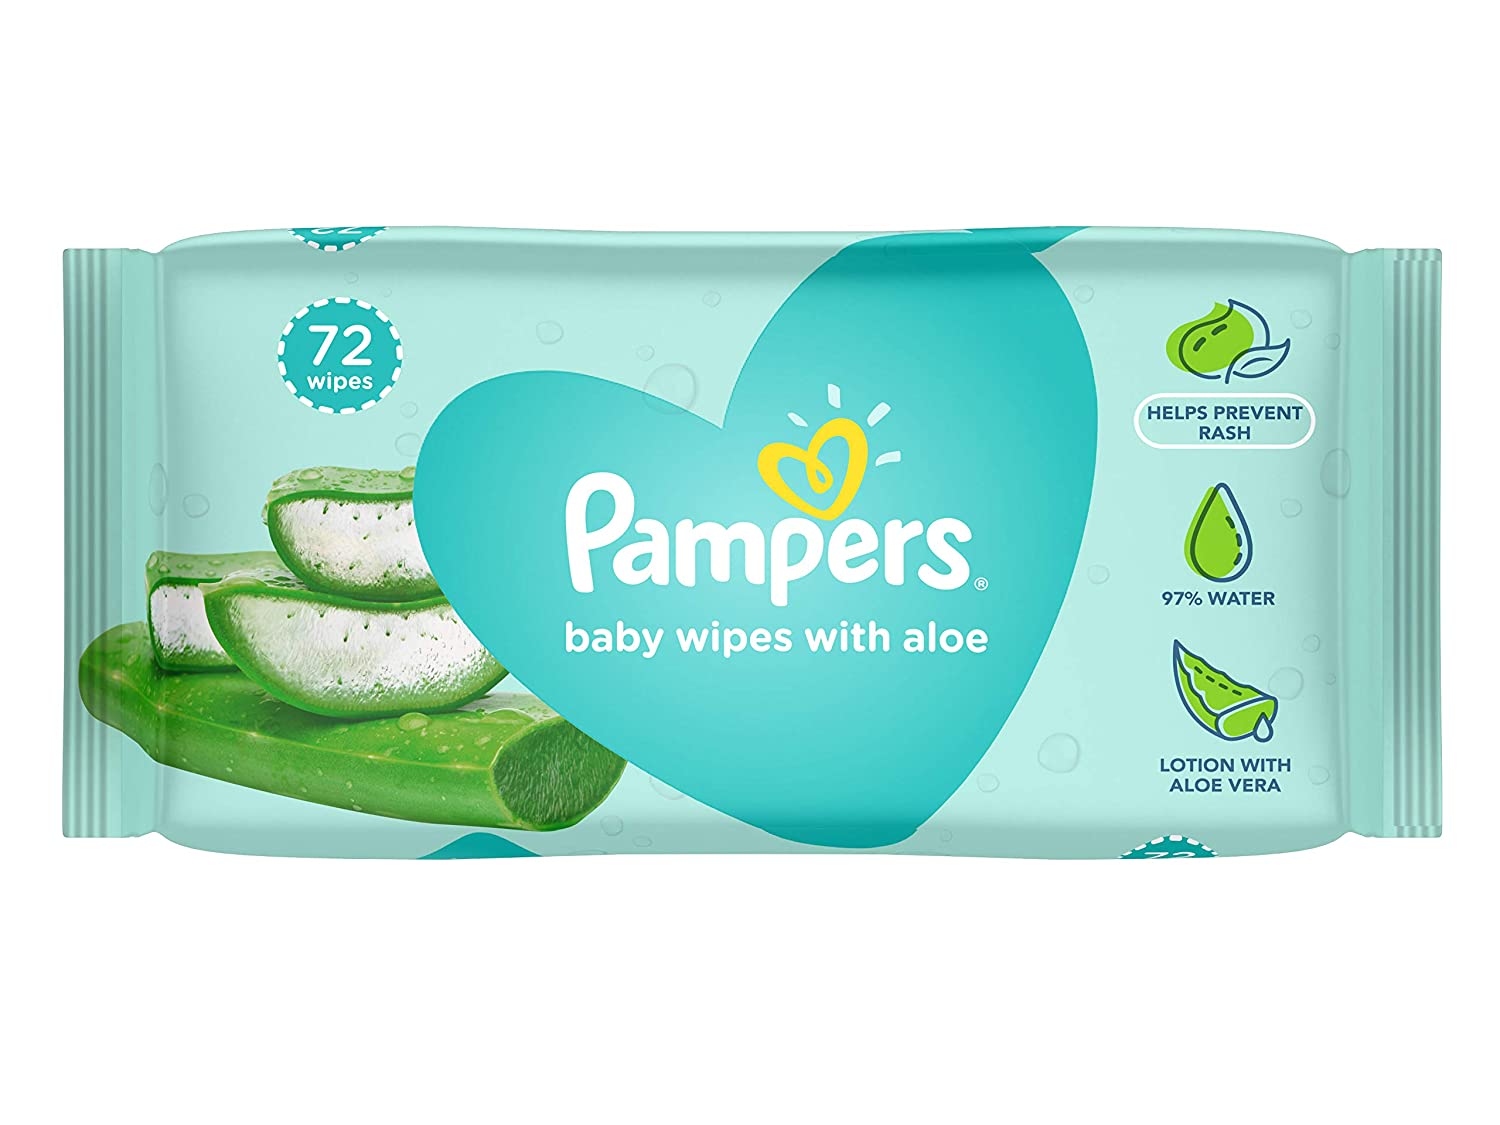 Pampers Aloe Baby Wipes, 72 Count, Pack of 1 